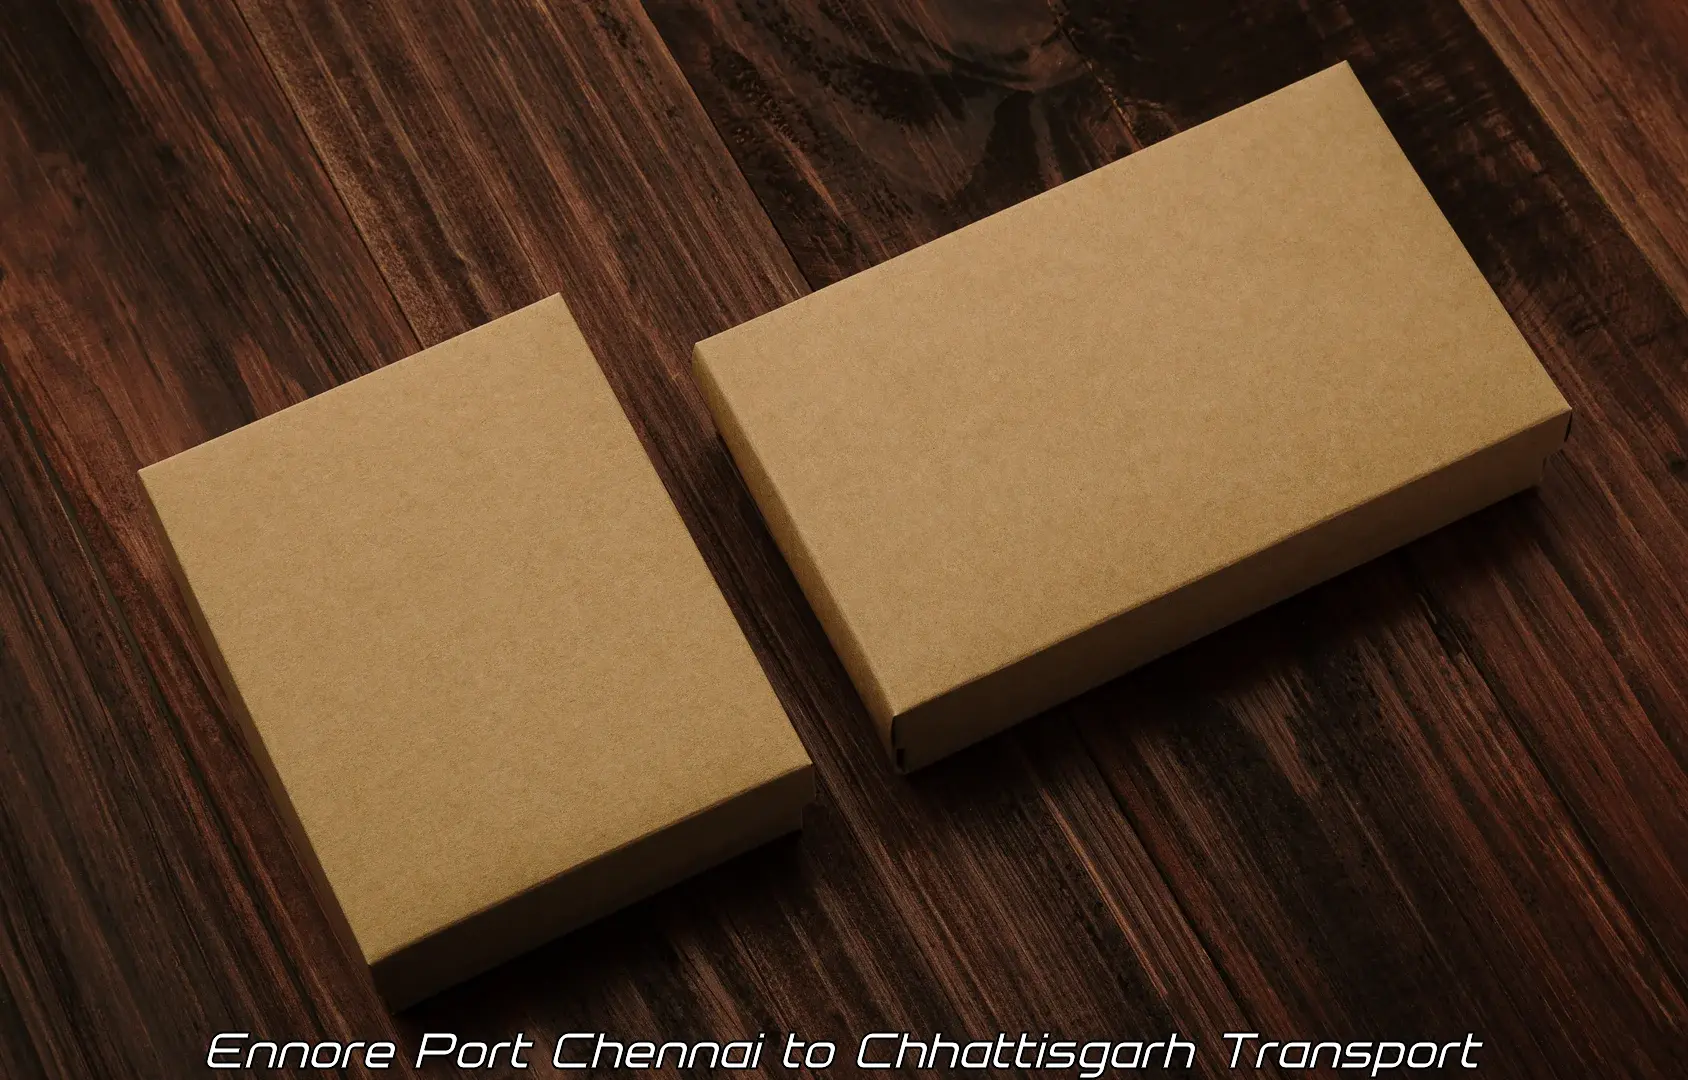 Shipping services in Ennore Port Chennai to Kondagaon